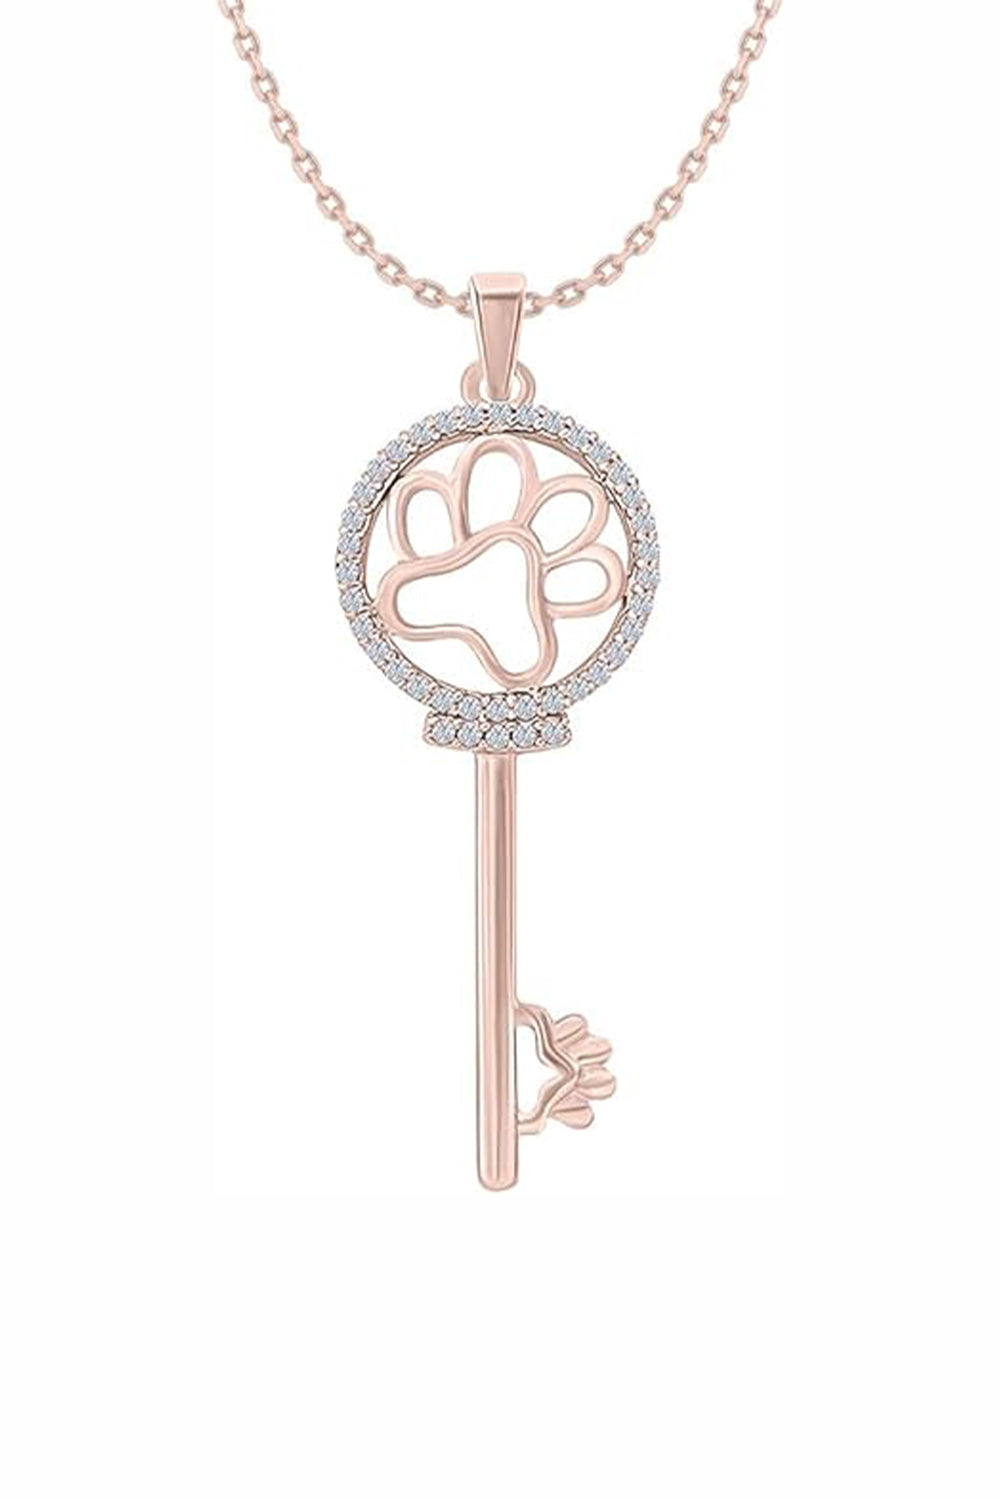 Rose Gold Color Paw Print Key Pendant Necklace for Women